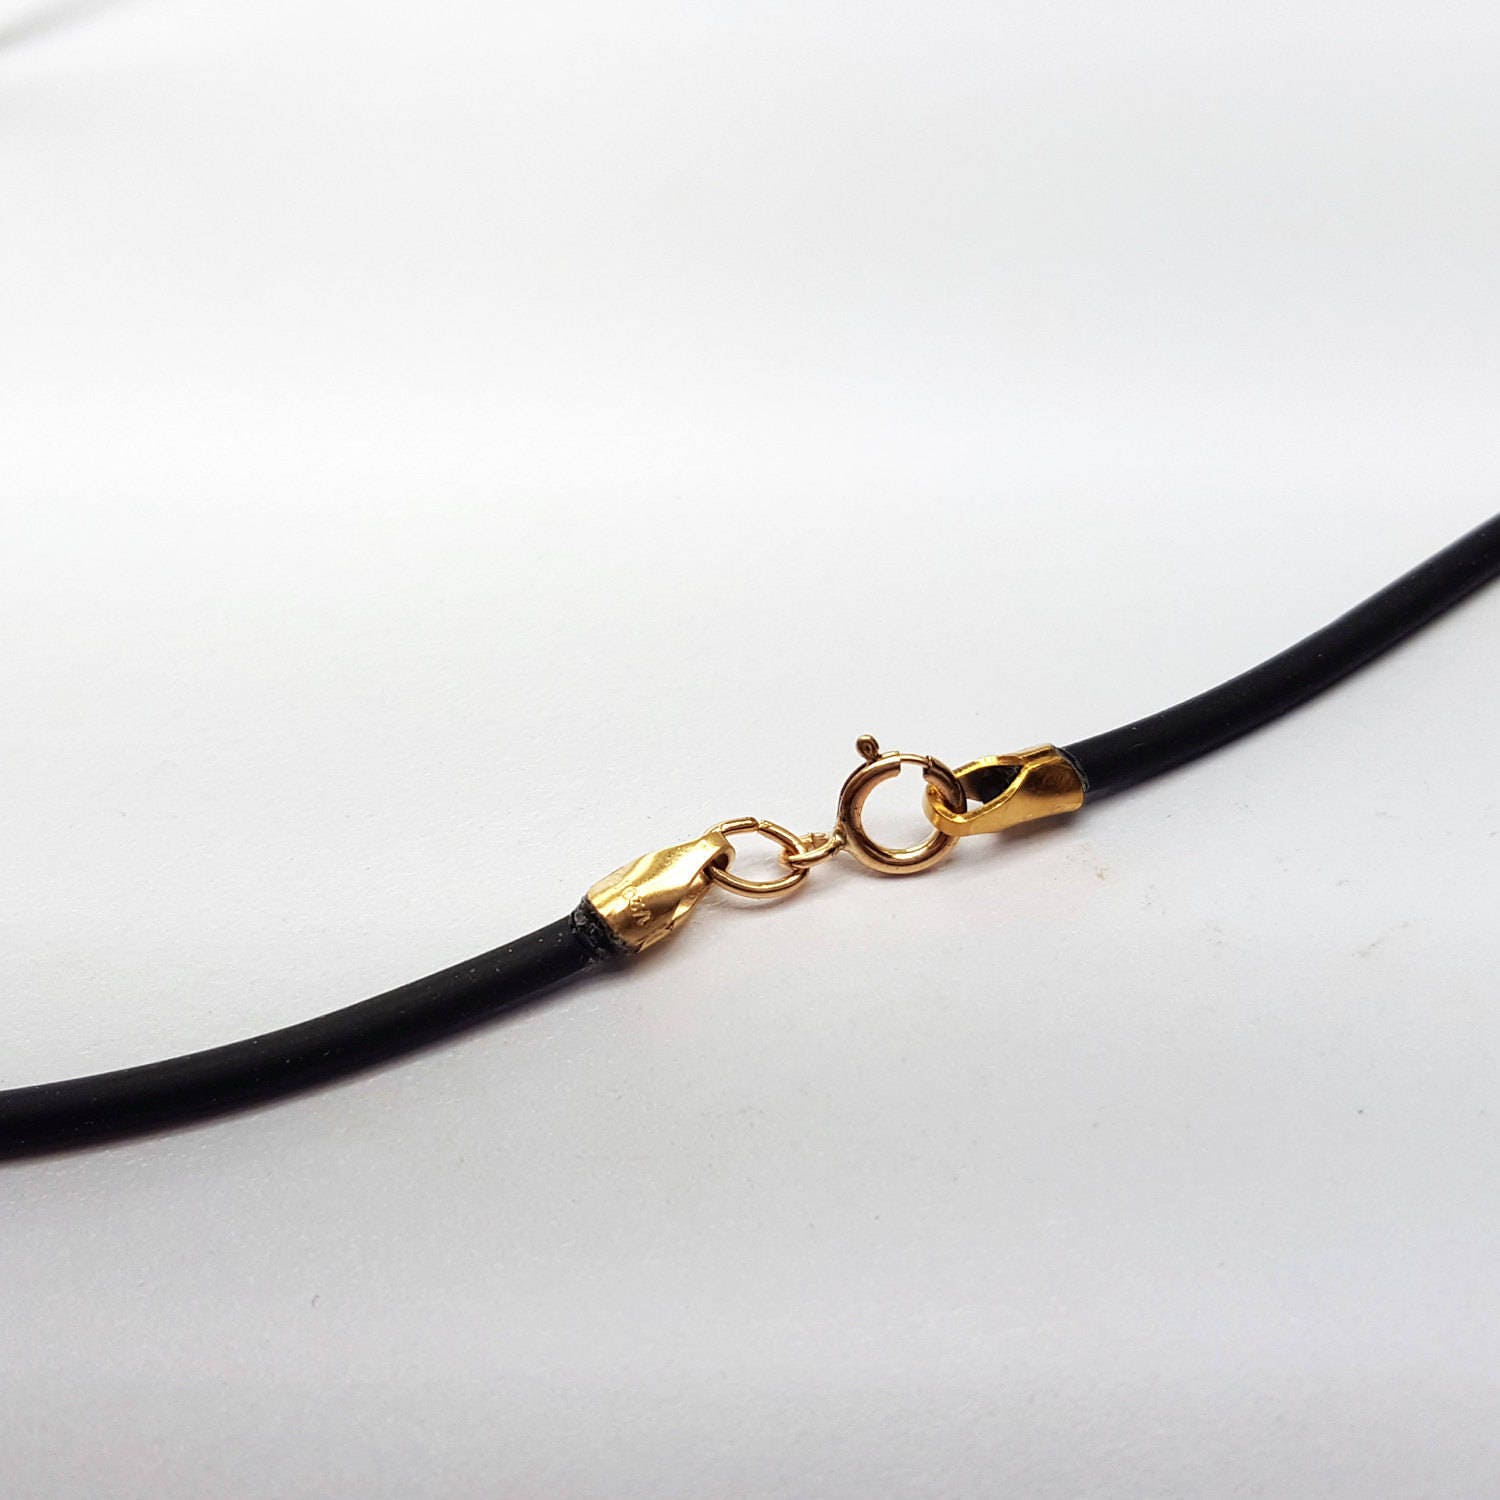 9M Black Braided Leather Necklace Cord String DIY 3Mm HOT With 3Mm Black  Rubber Cord Necklace - 24 Inch - AliExpress